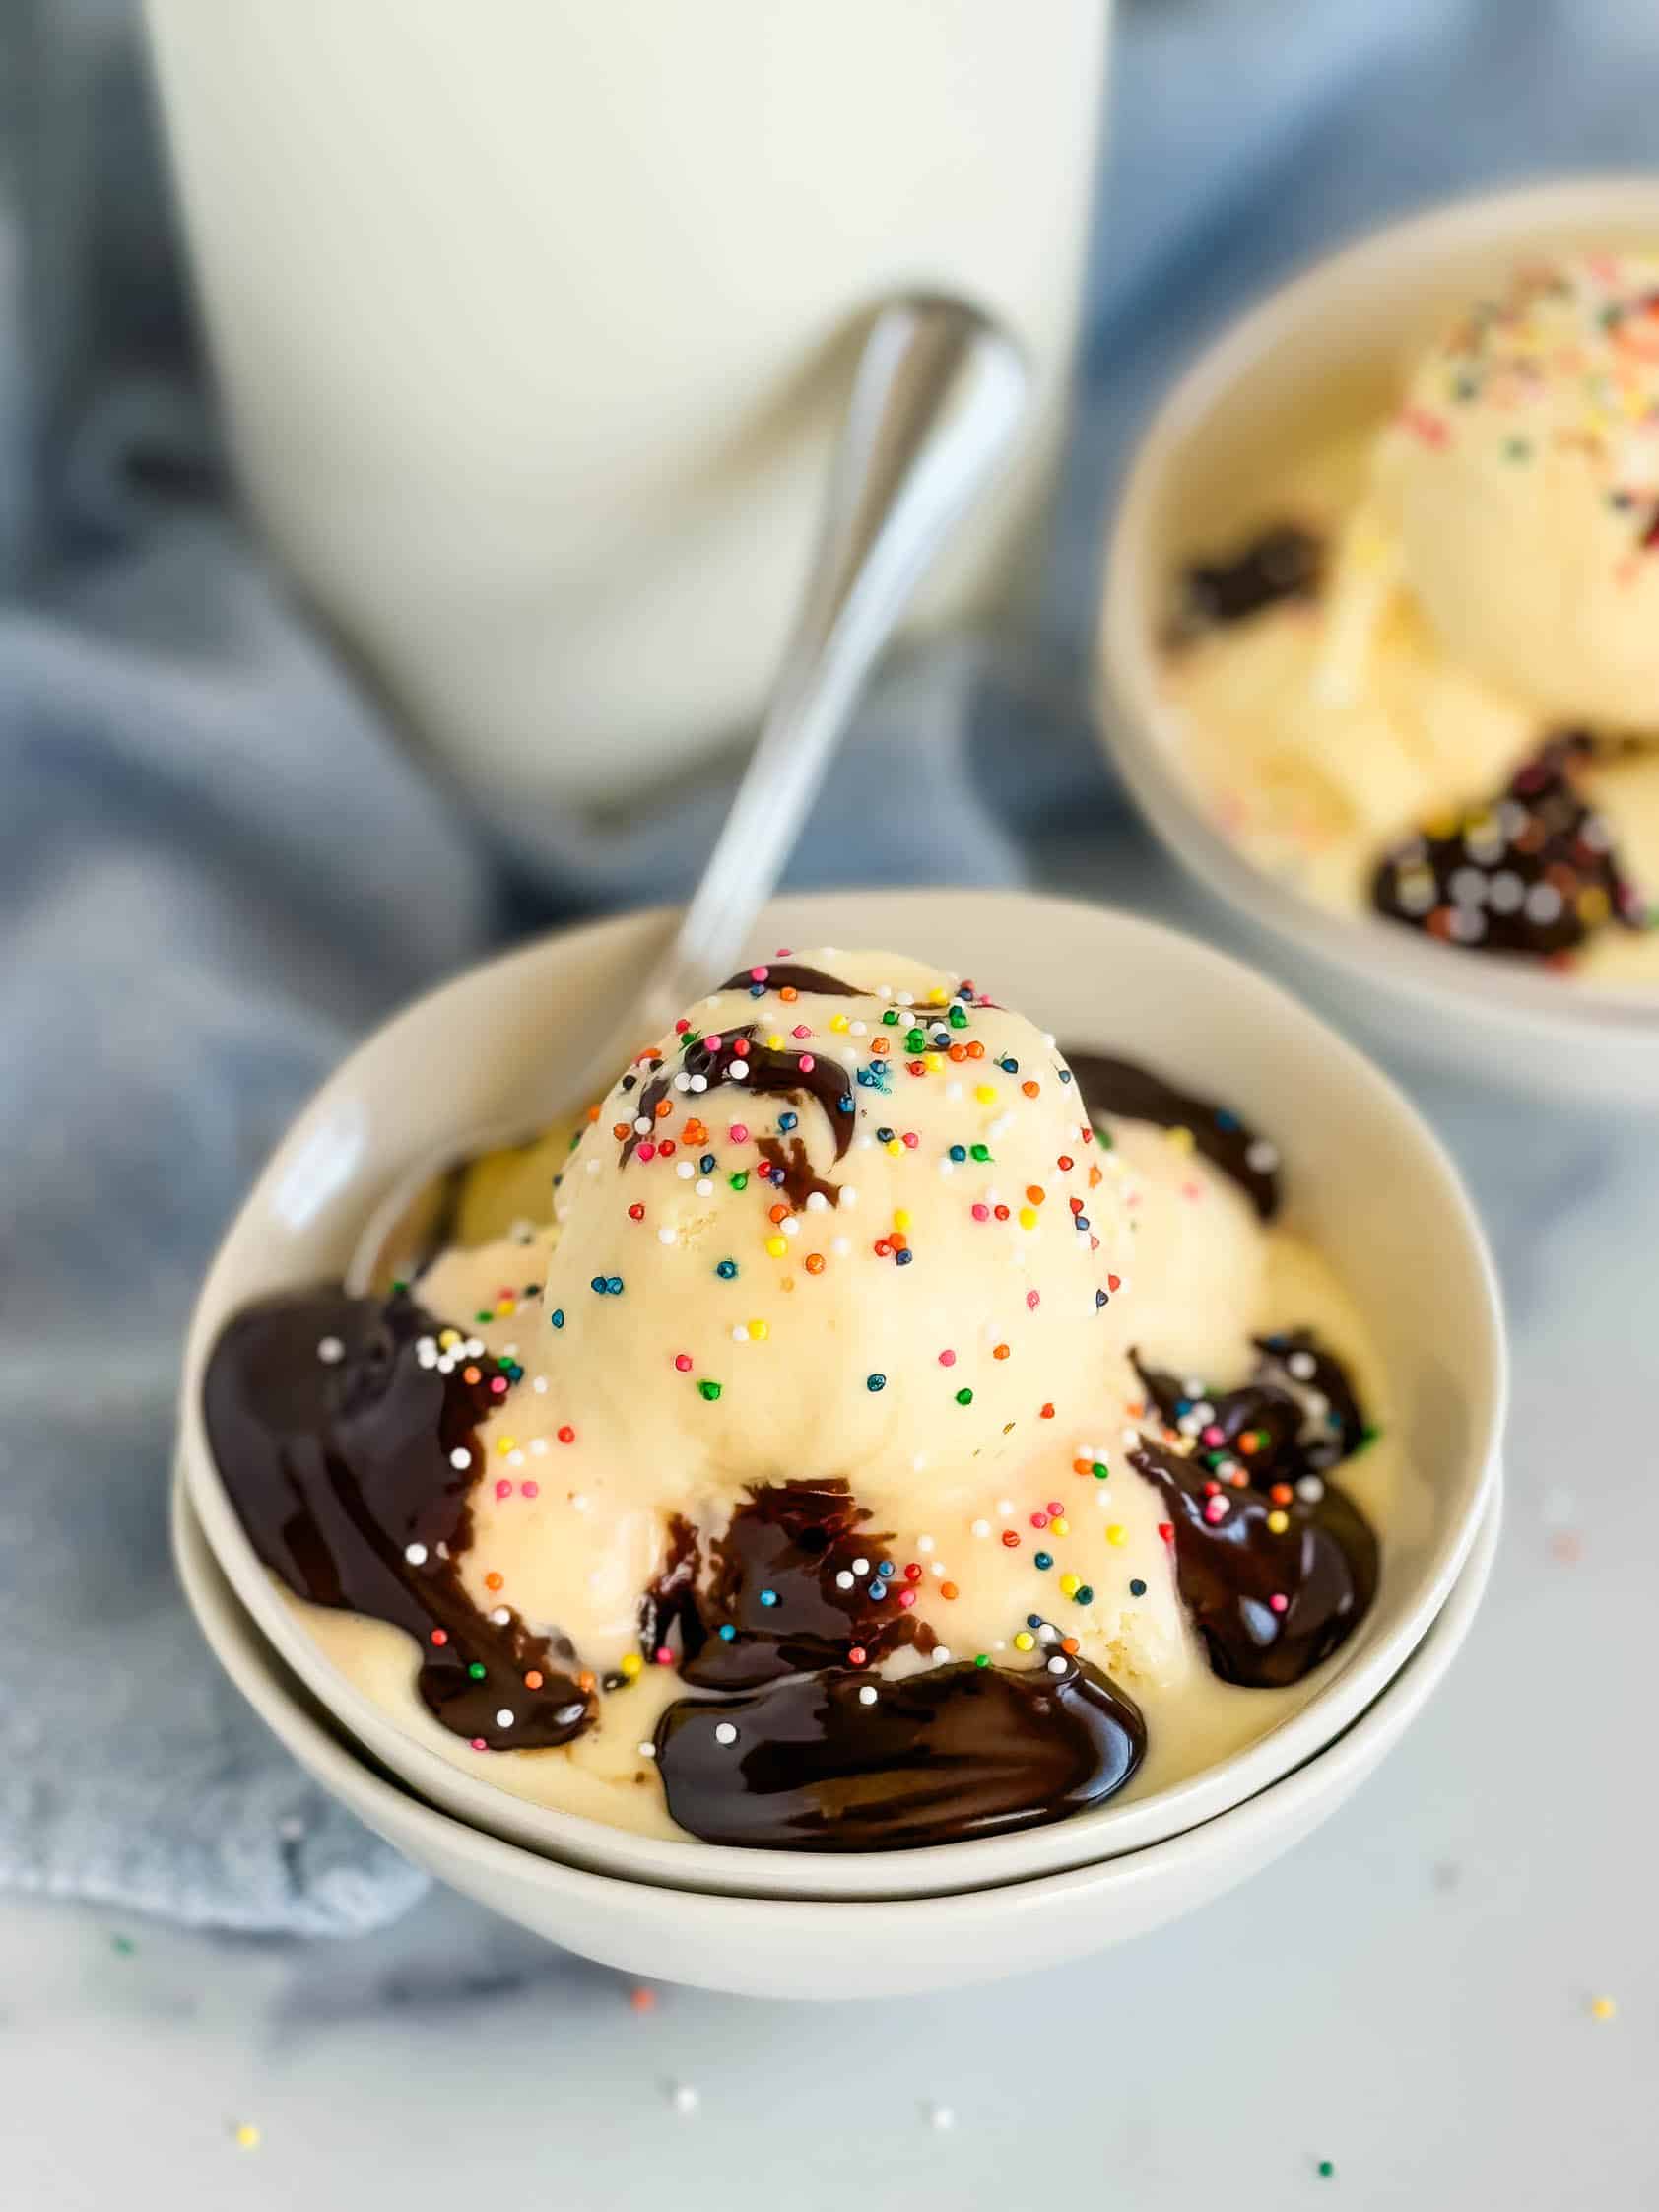 Hot fudge sauce poured over a bowl of ice cream.